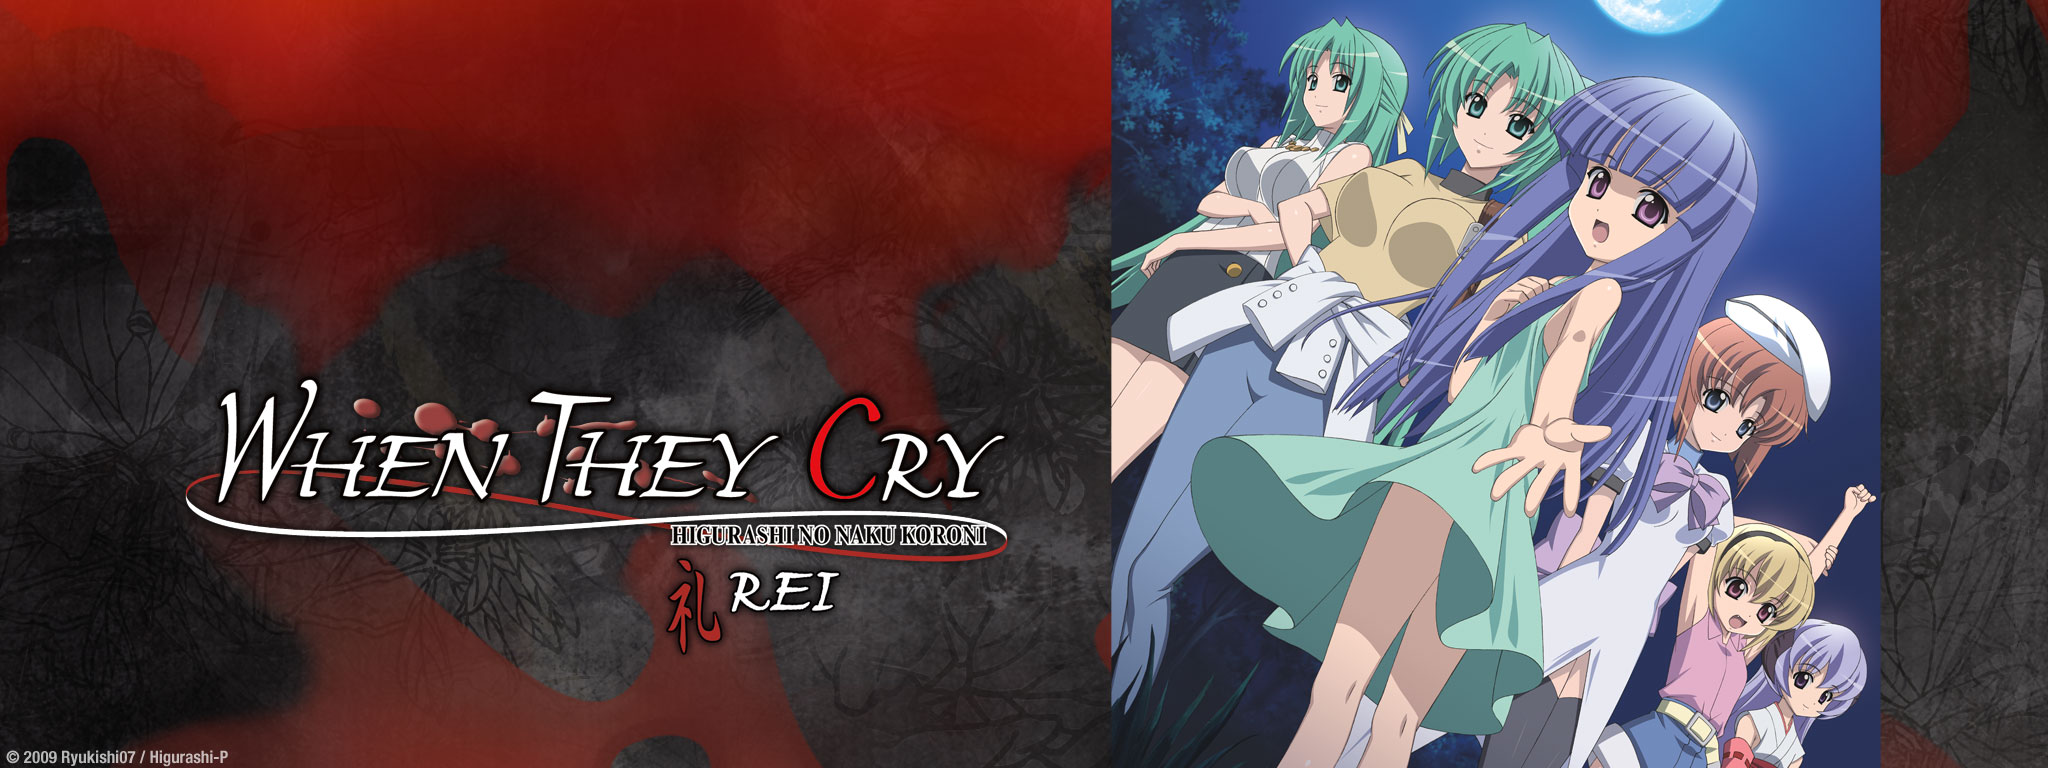 Title Art for When They Cry Rei